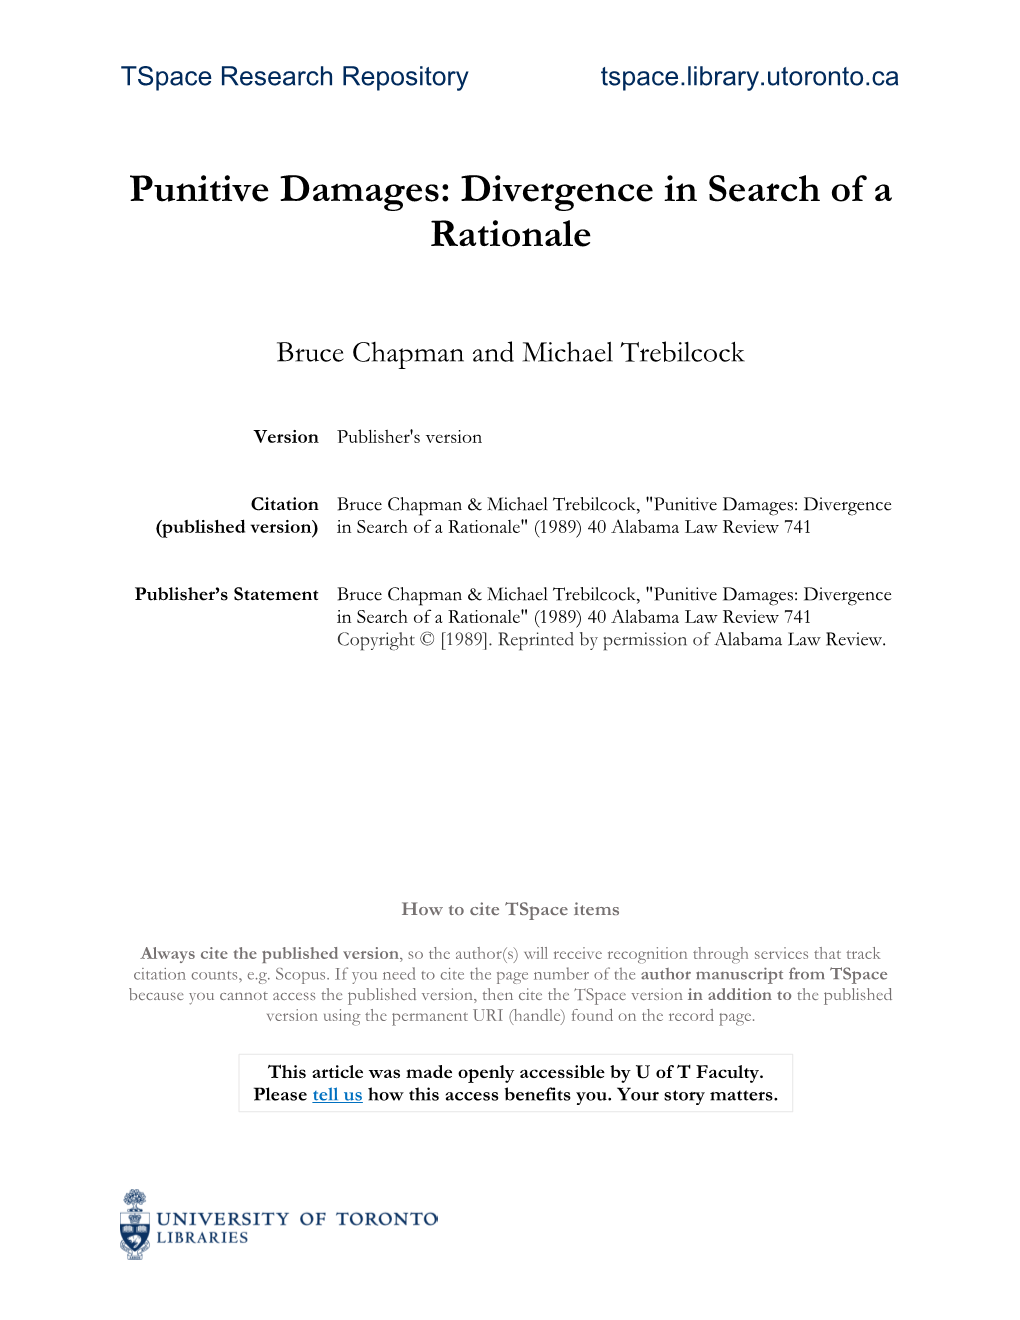 Punitive Damages: Divergence in Search of a Rationale